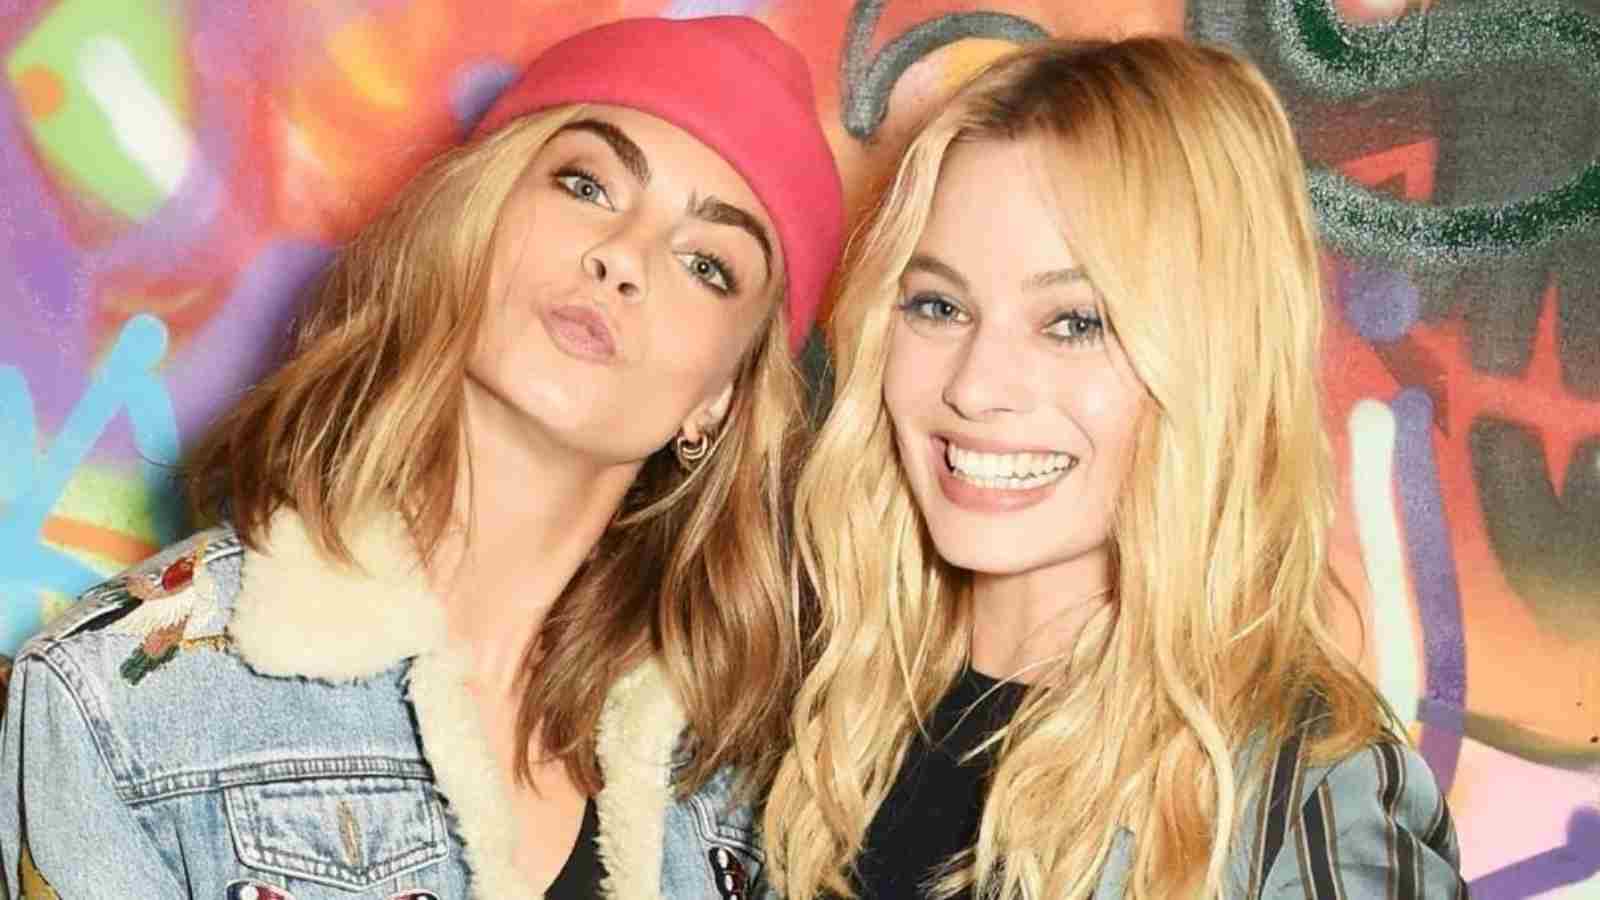 Margot Robbie reveals if she and Cara Delevingne got hurt by the paparazzo in Argentina